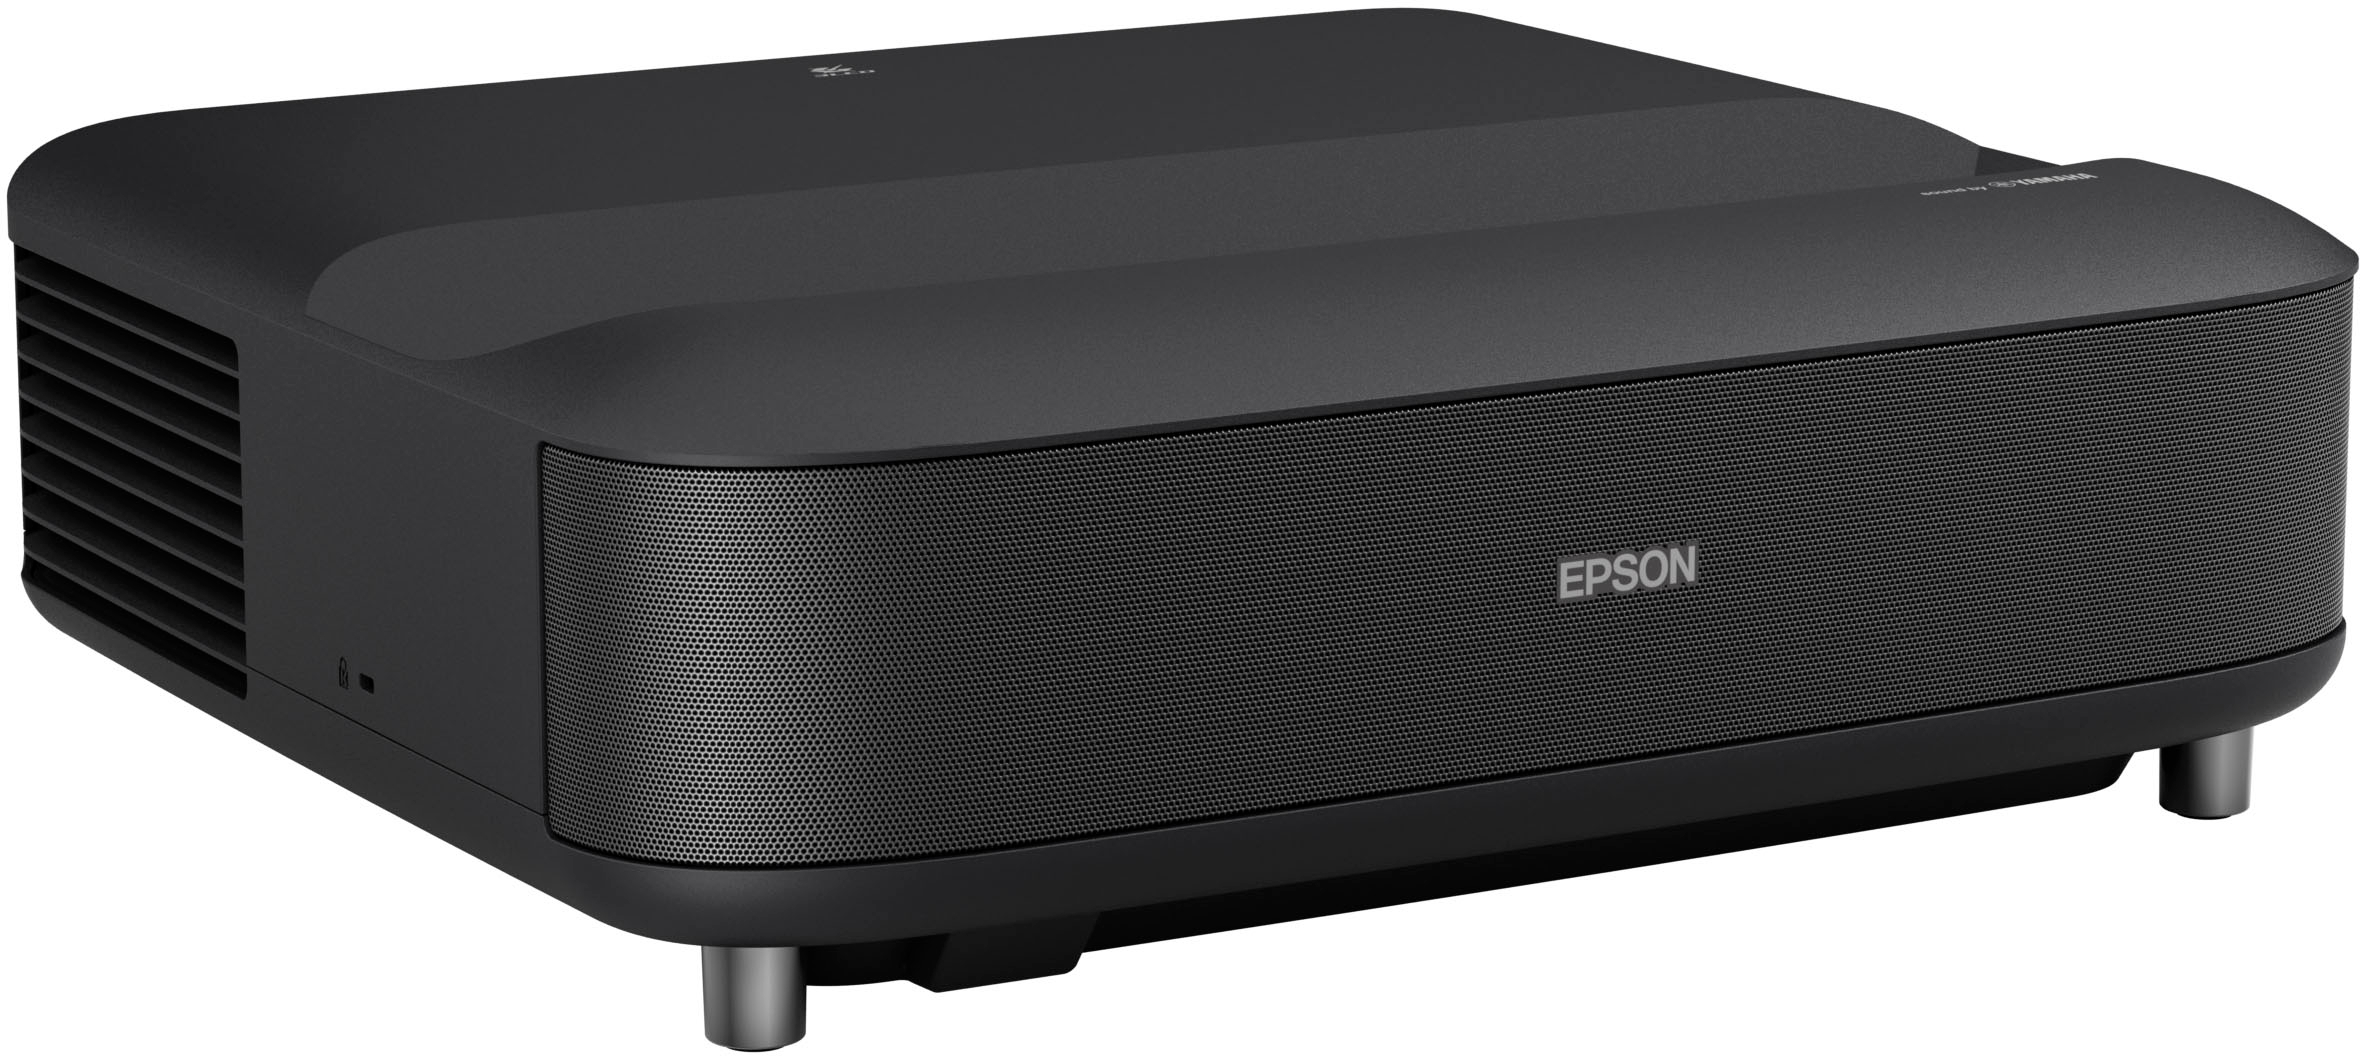 Angle View: Epson - LS650 4K PRO-UHD Ultra Short Throw 3-Chip 3LCD Laser Projector, 3600 Lumens, 60”-120", Setting Assistant App, Android TV - Black